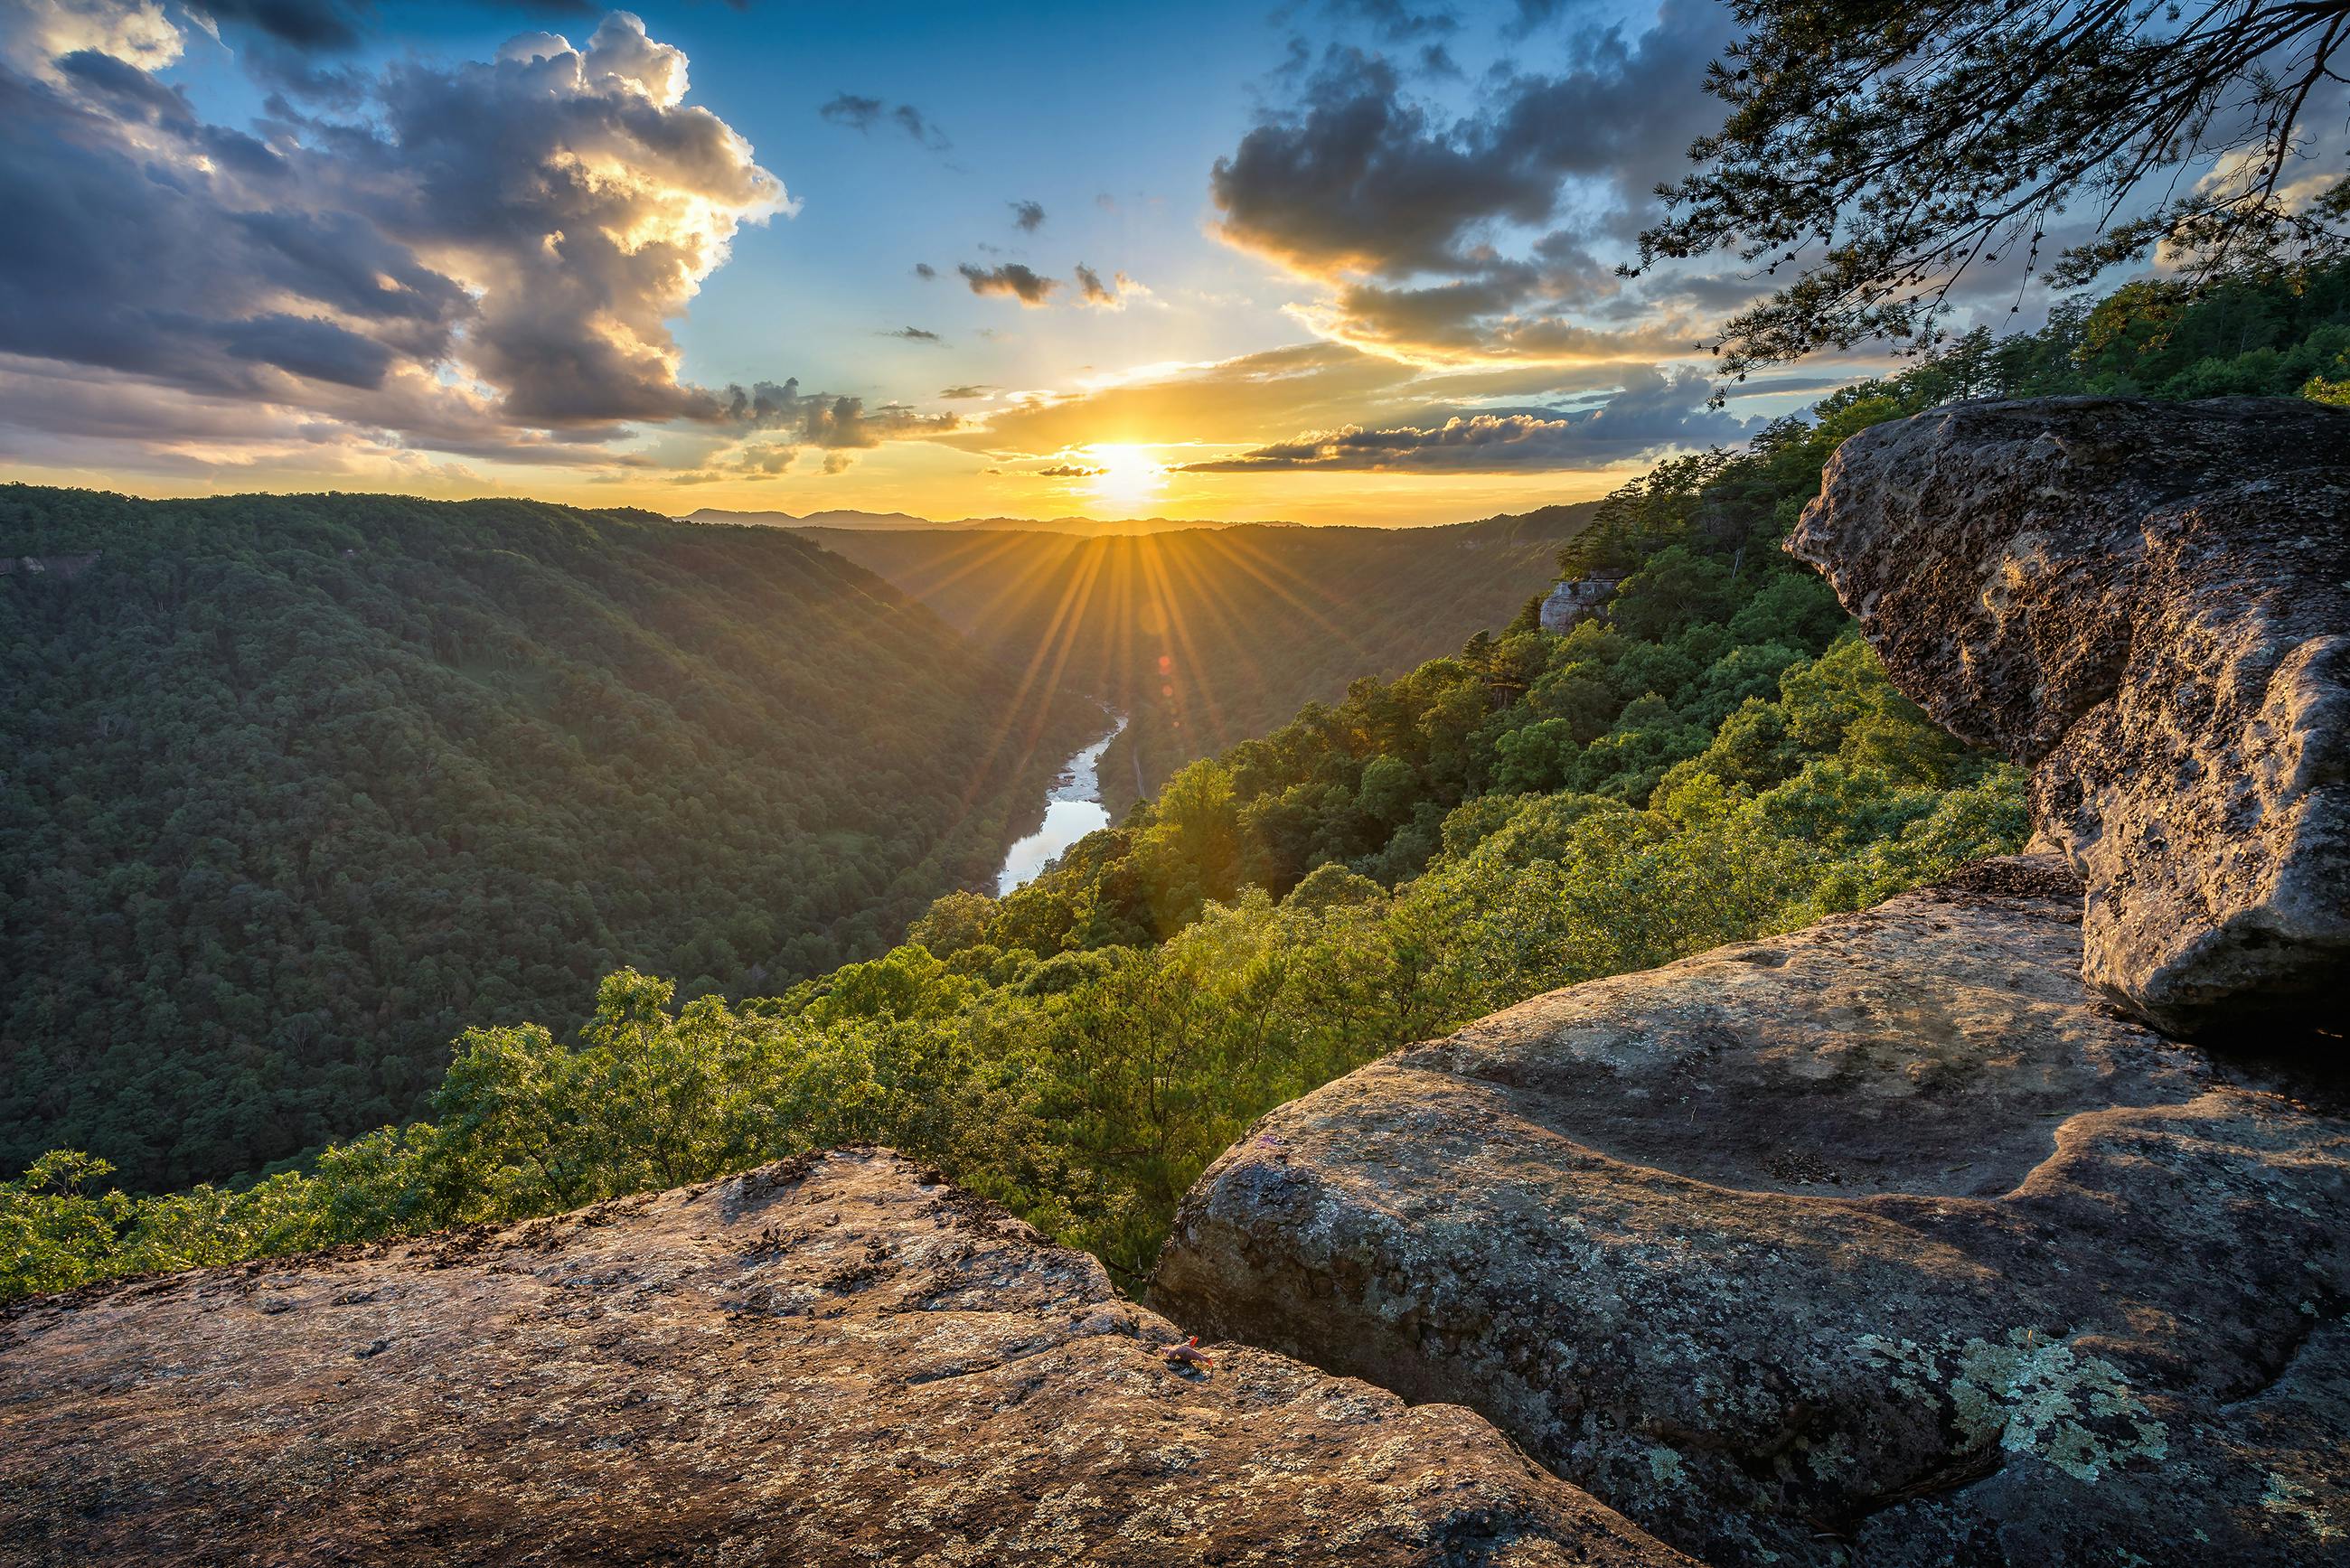 A picture of a sunset on a hill with a river running below through a lush green valley